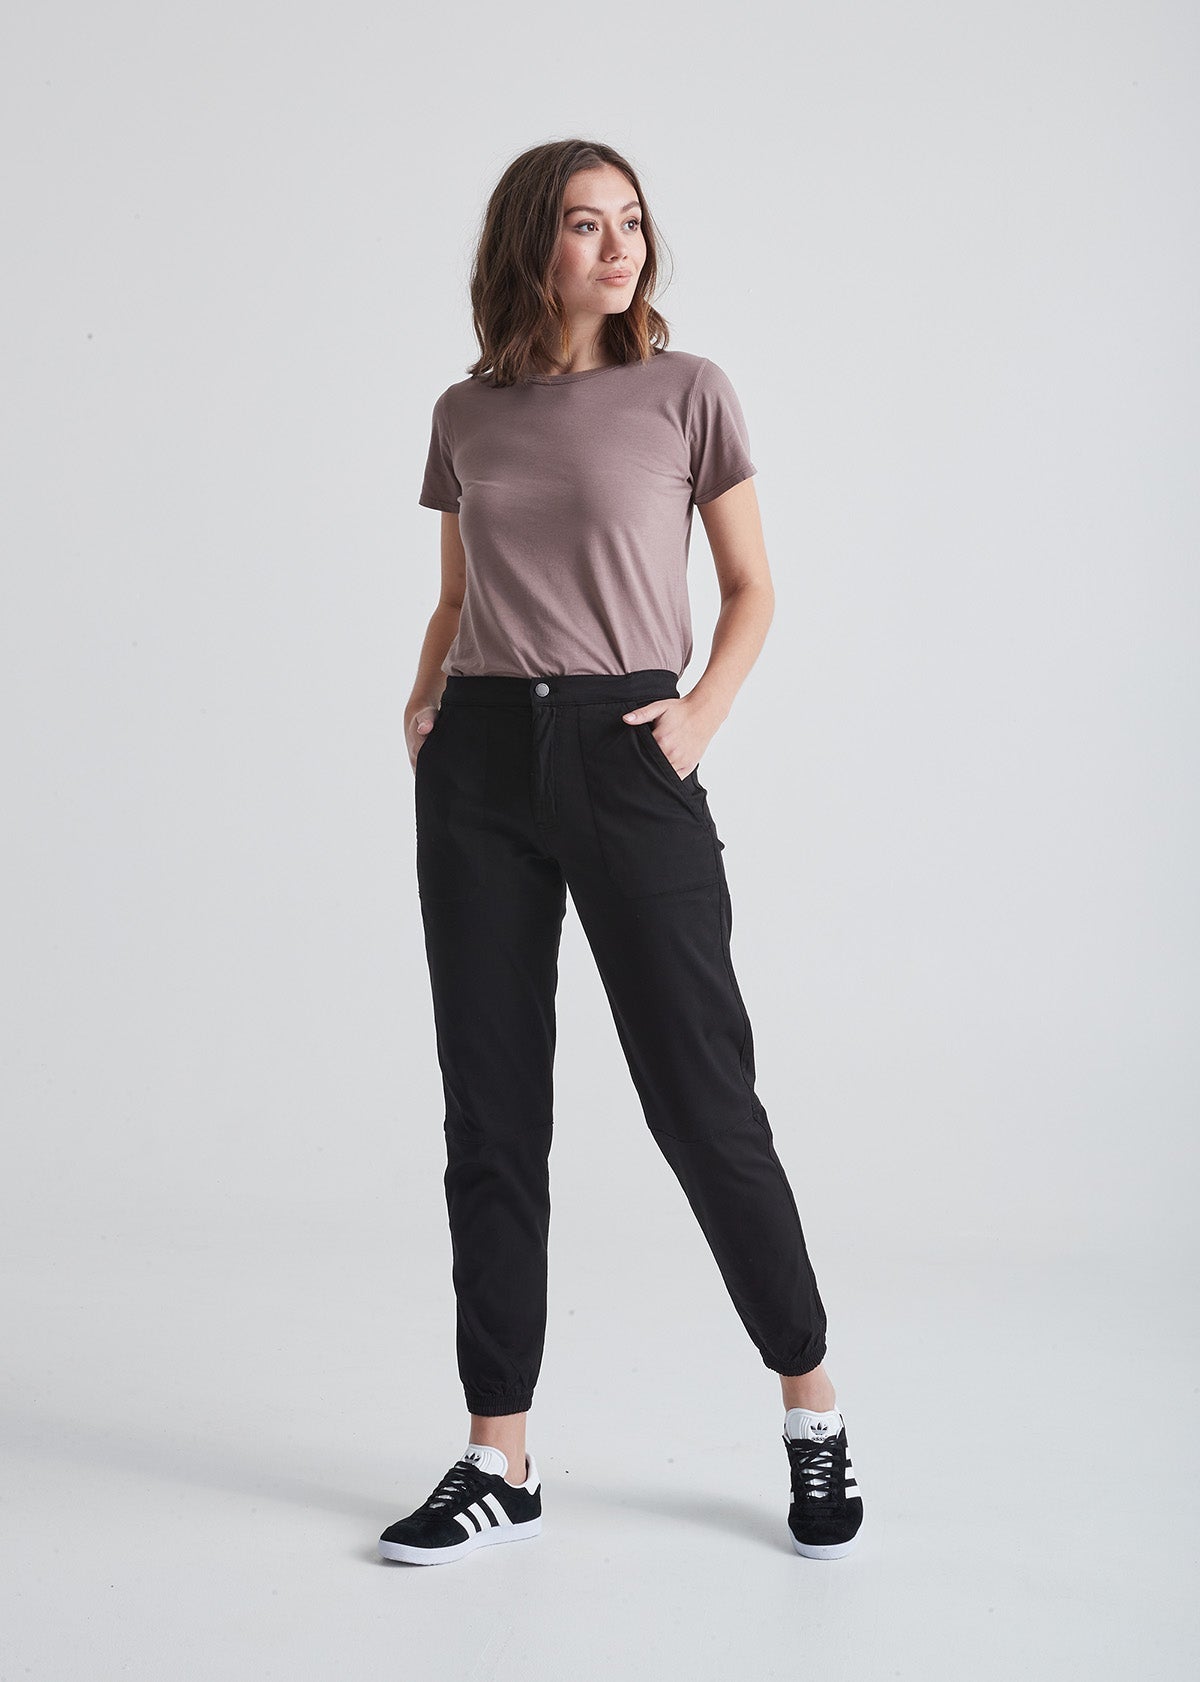 Women's Skinny and Slim Fit – Tagged joggers